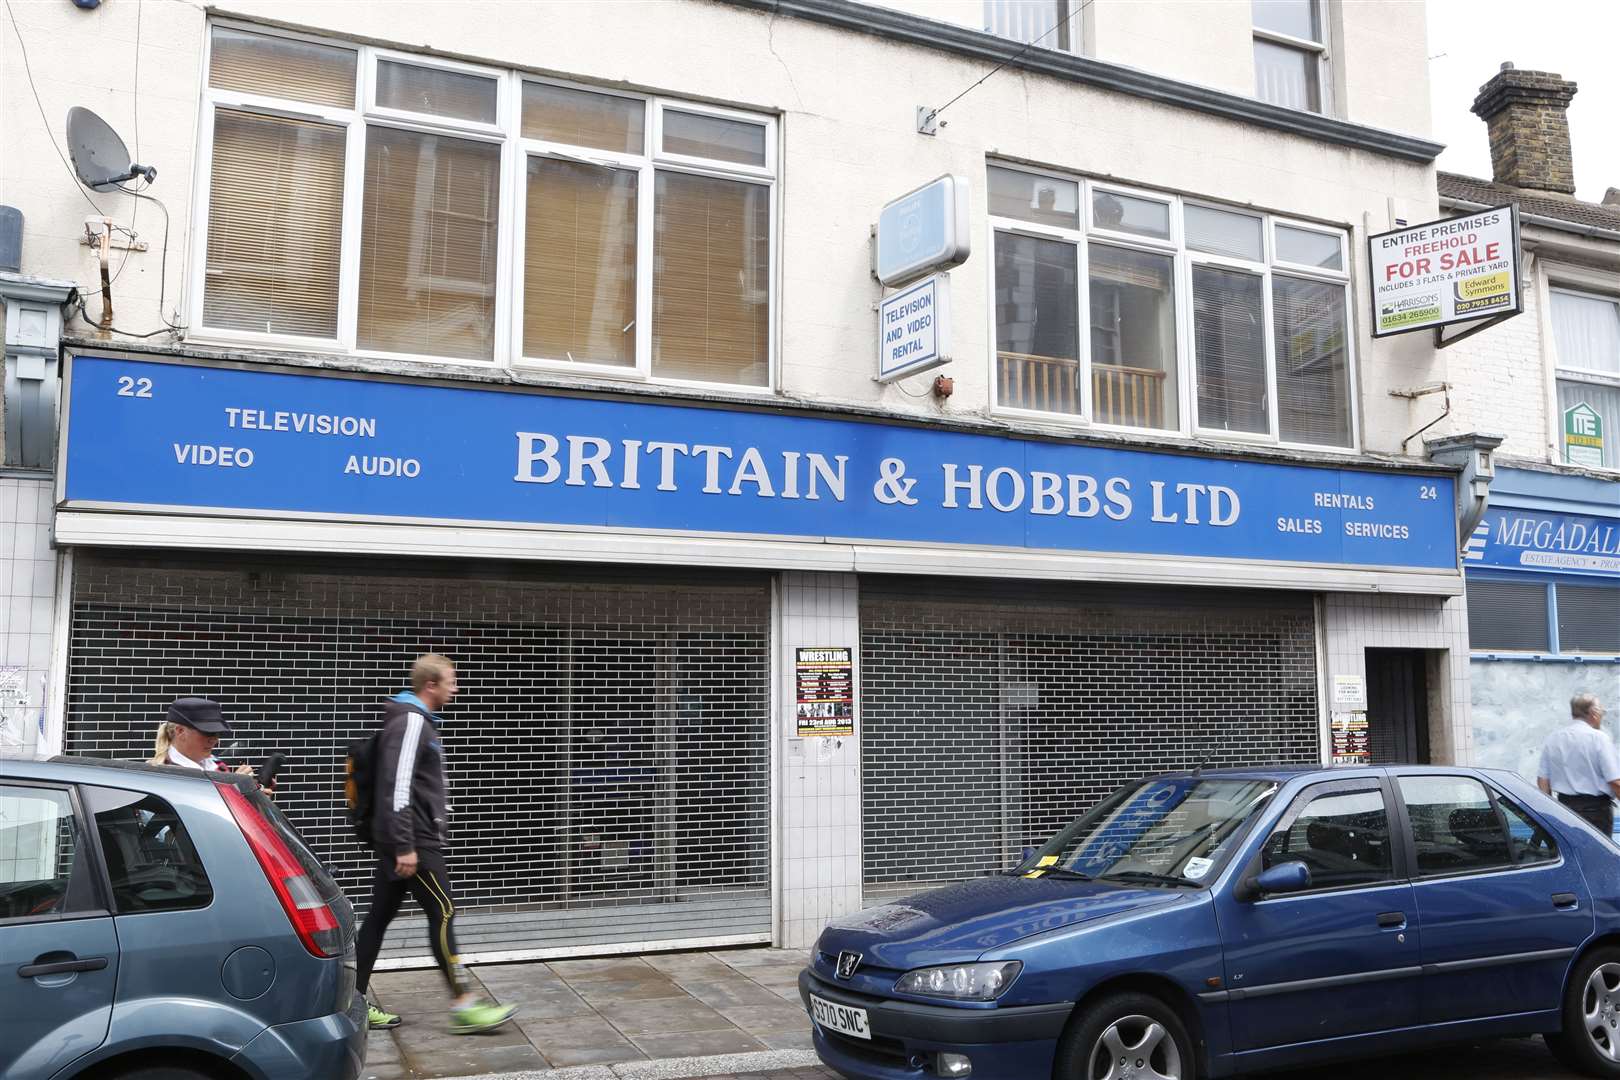 The pub took the place of the Brittain and Hobbs store (Picture: Matthew Walker)